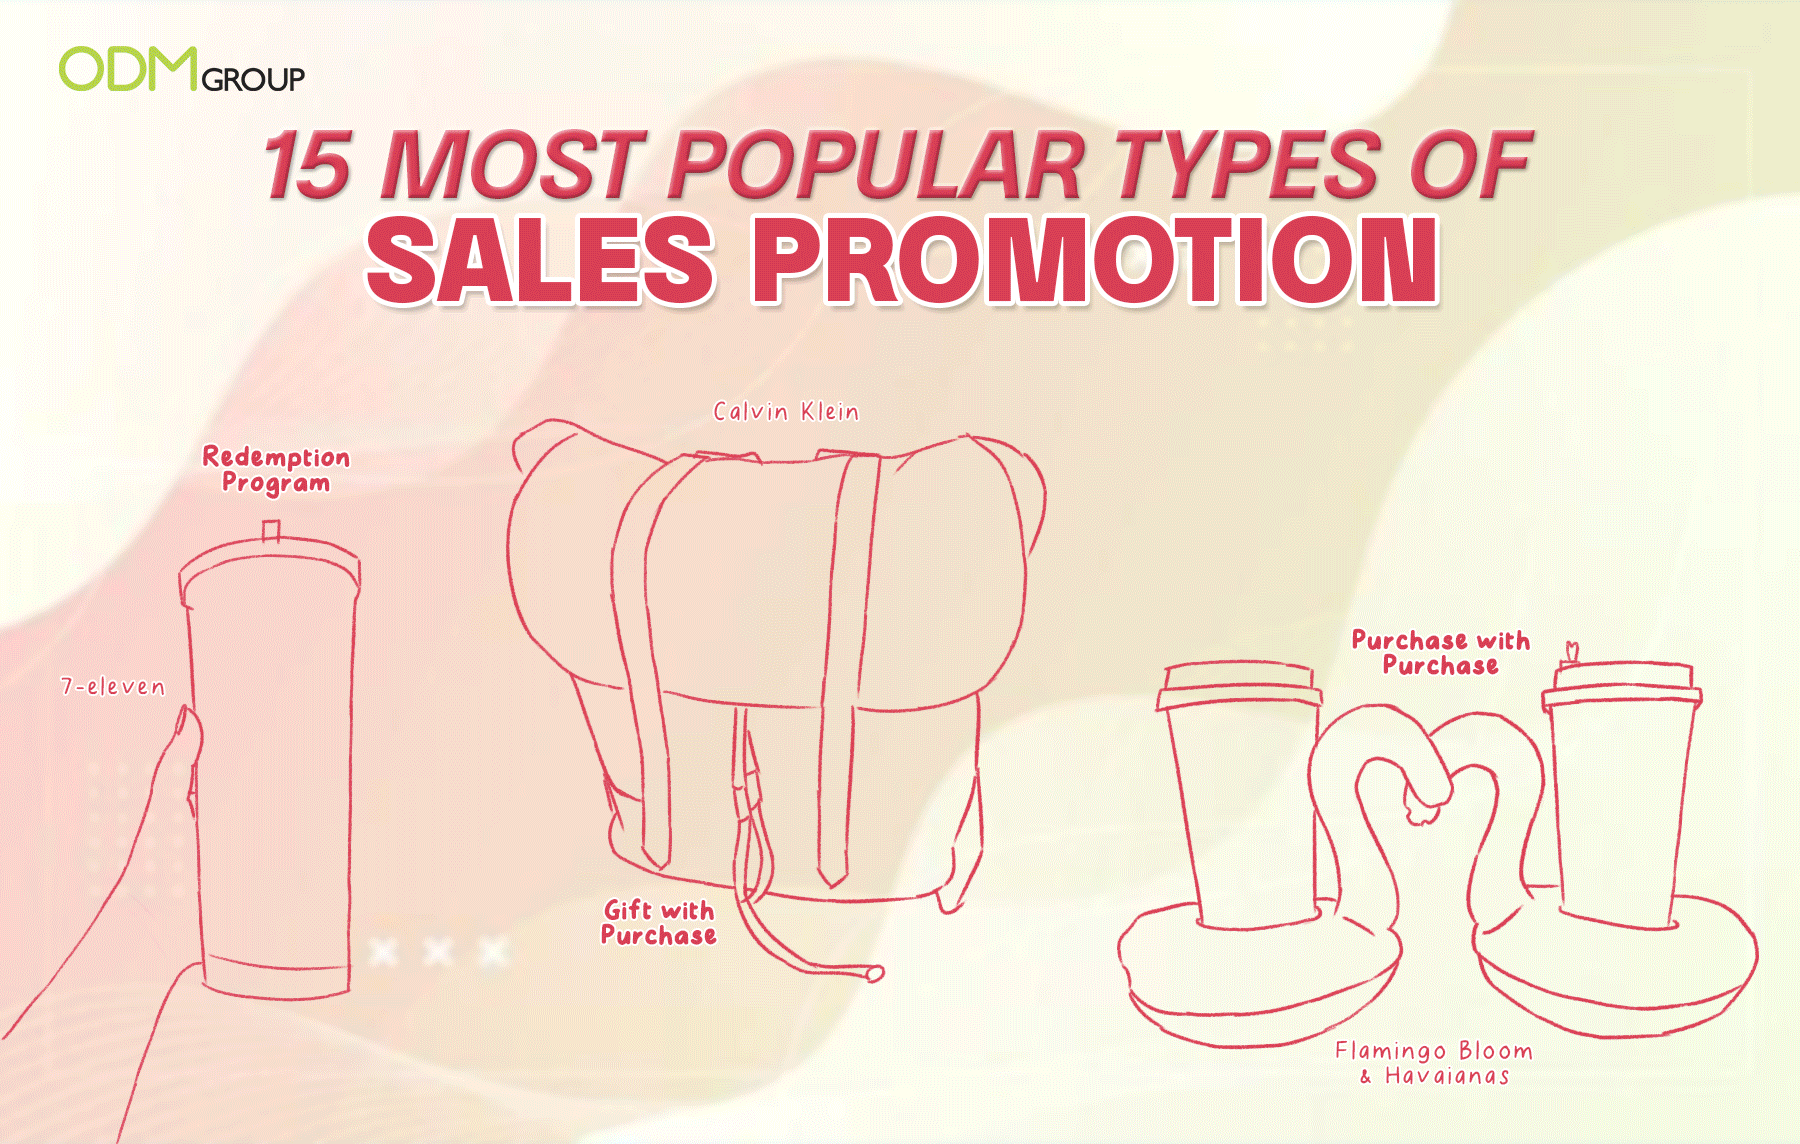 Types of Sales Promotion